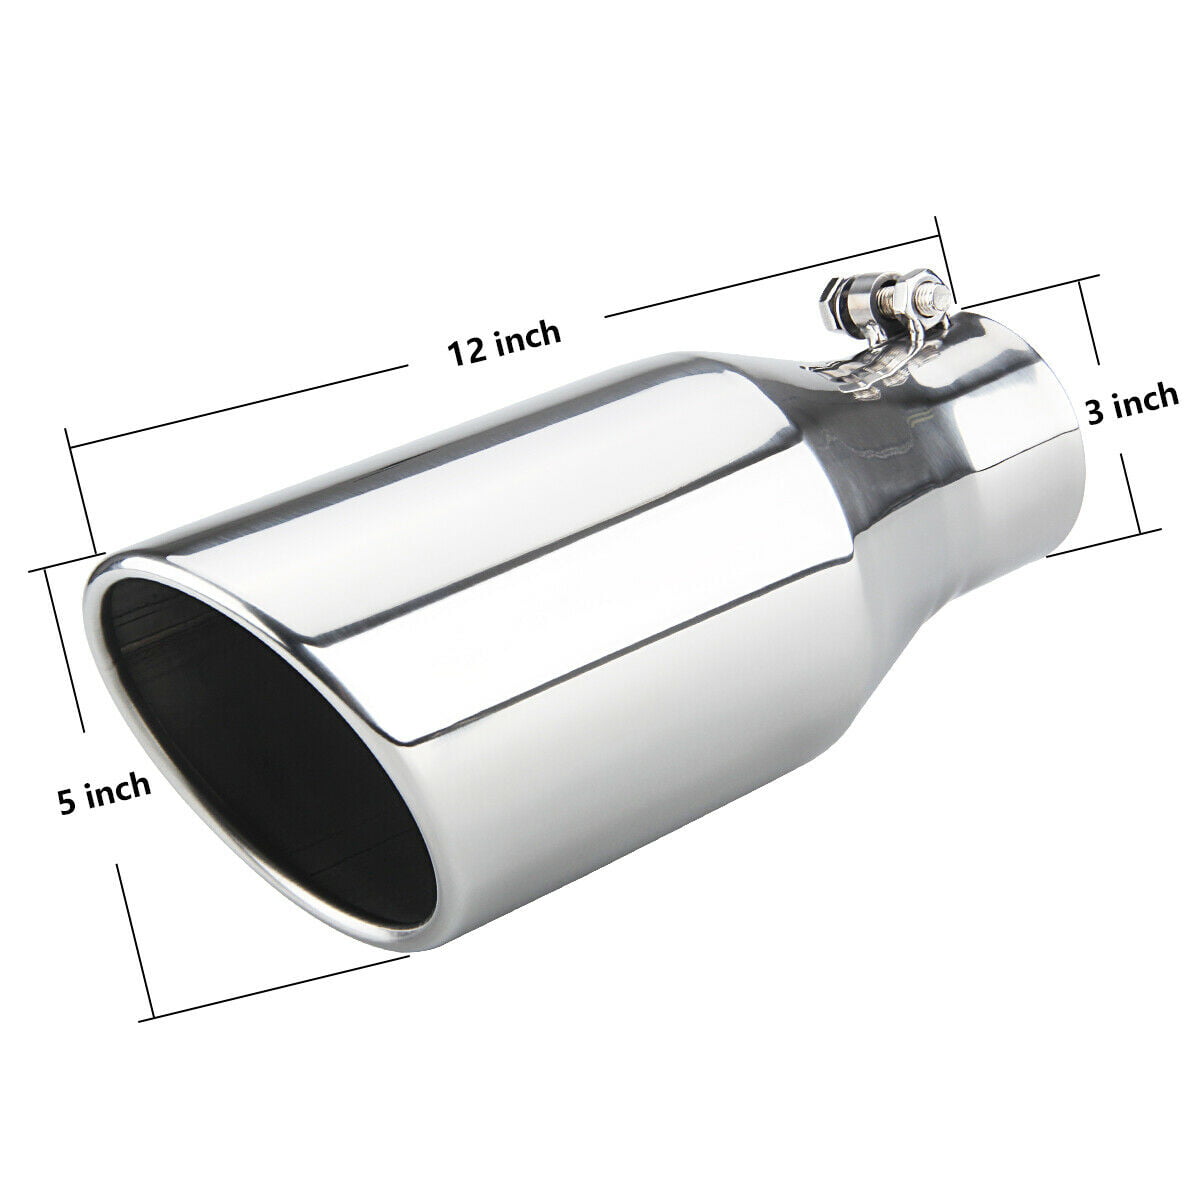 Stainless Steel 3” Inlet 5” Outlet 12” Long Bolt On Polished Finish Muffler Tip For Tailpipe A-KARCK Exhaust Tip 3 Inch Inlet 